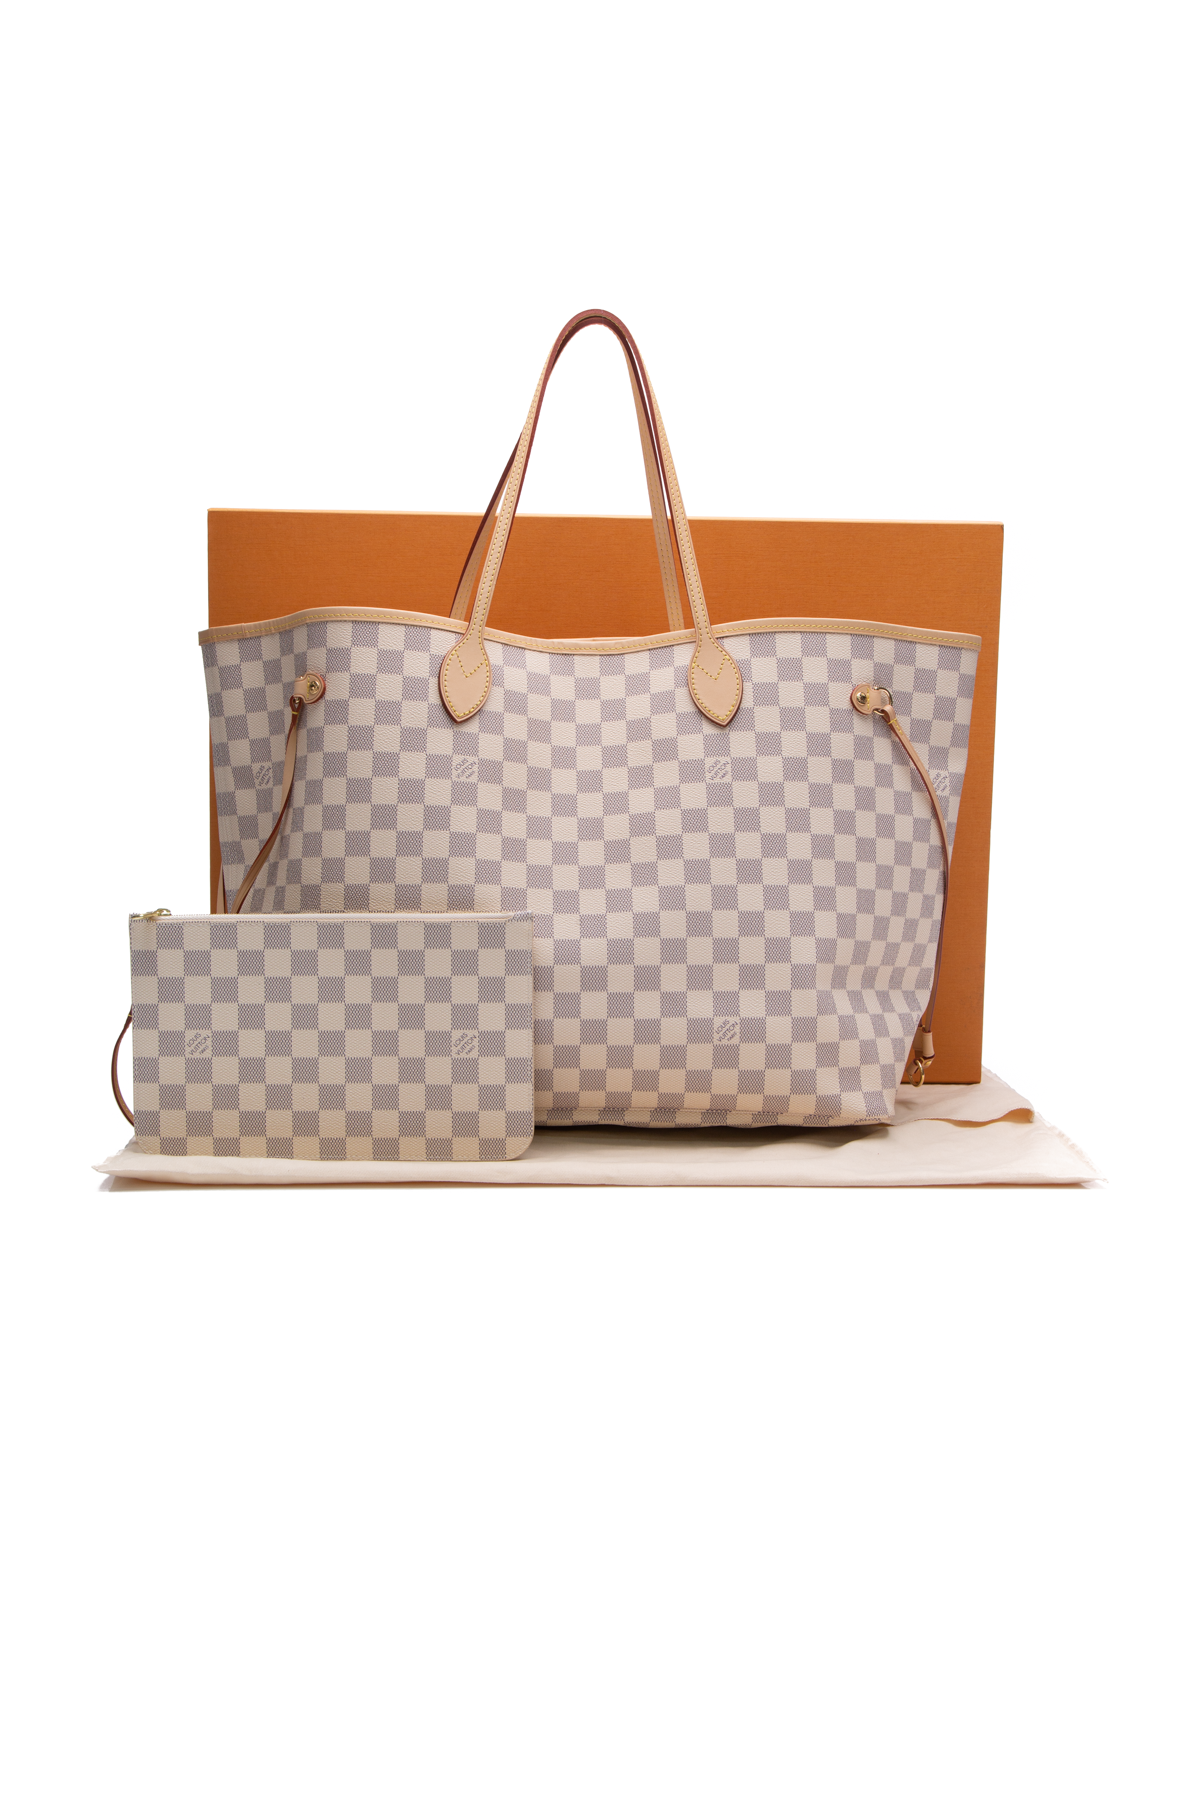 The Sweetest Thing  Louis vuitton handbags neverfull, Vuitton, Vuitton  handbags